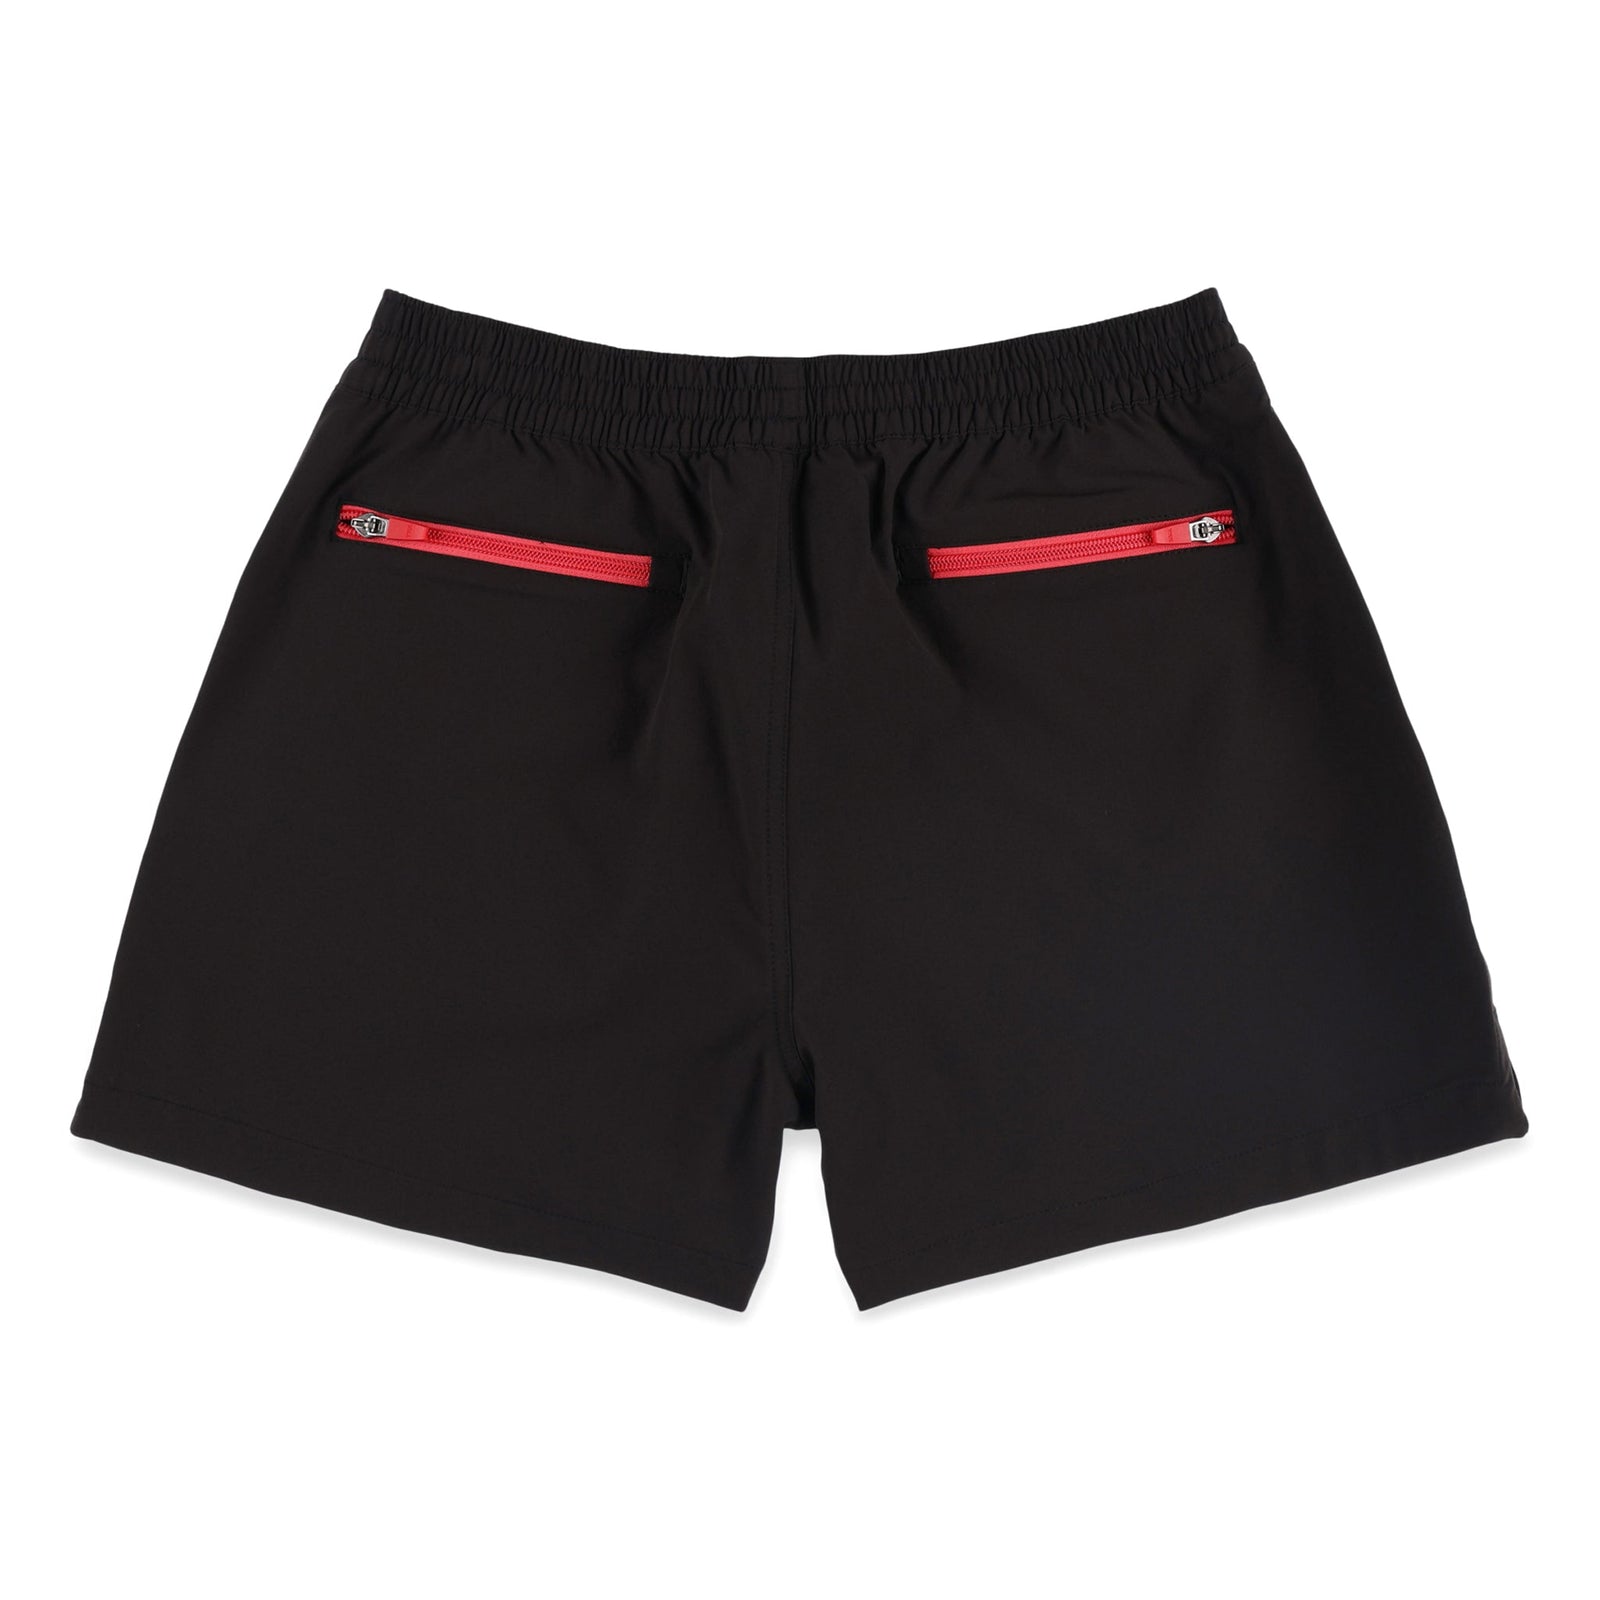 Back zipper pockets on Topo Designs Women's Global lightweight quick dry travel Shorts in "Black".